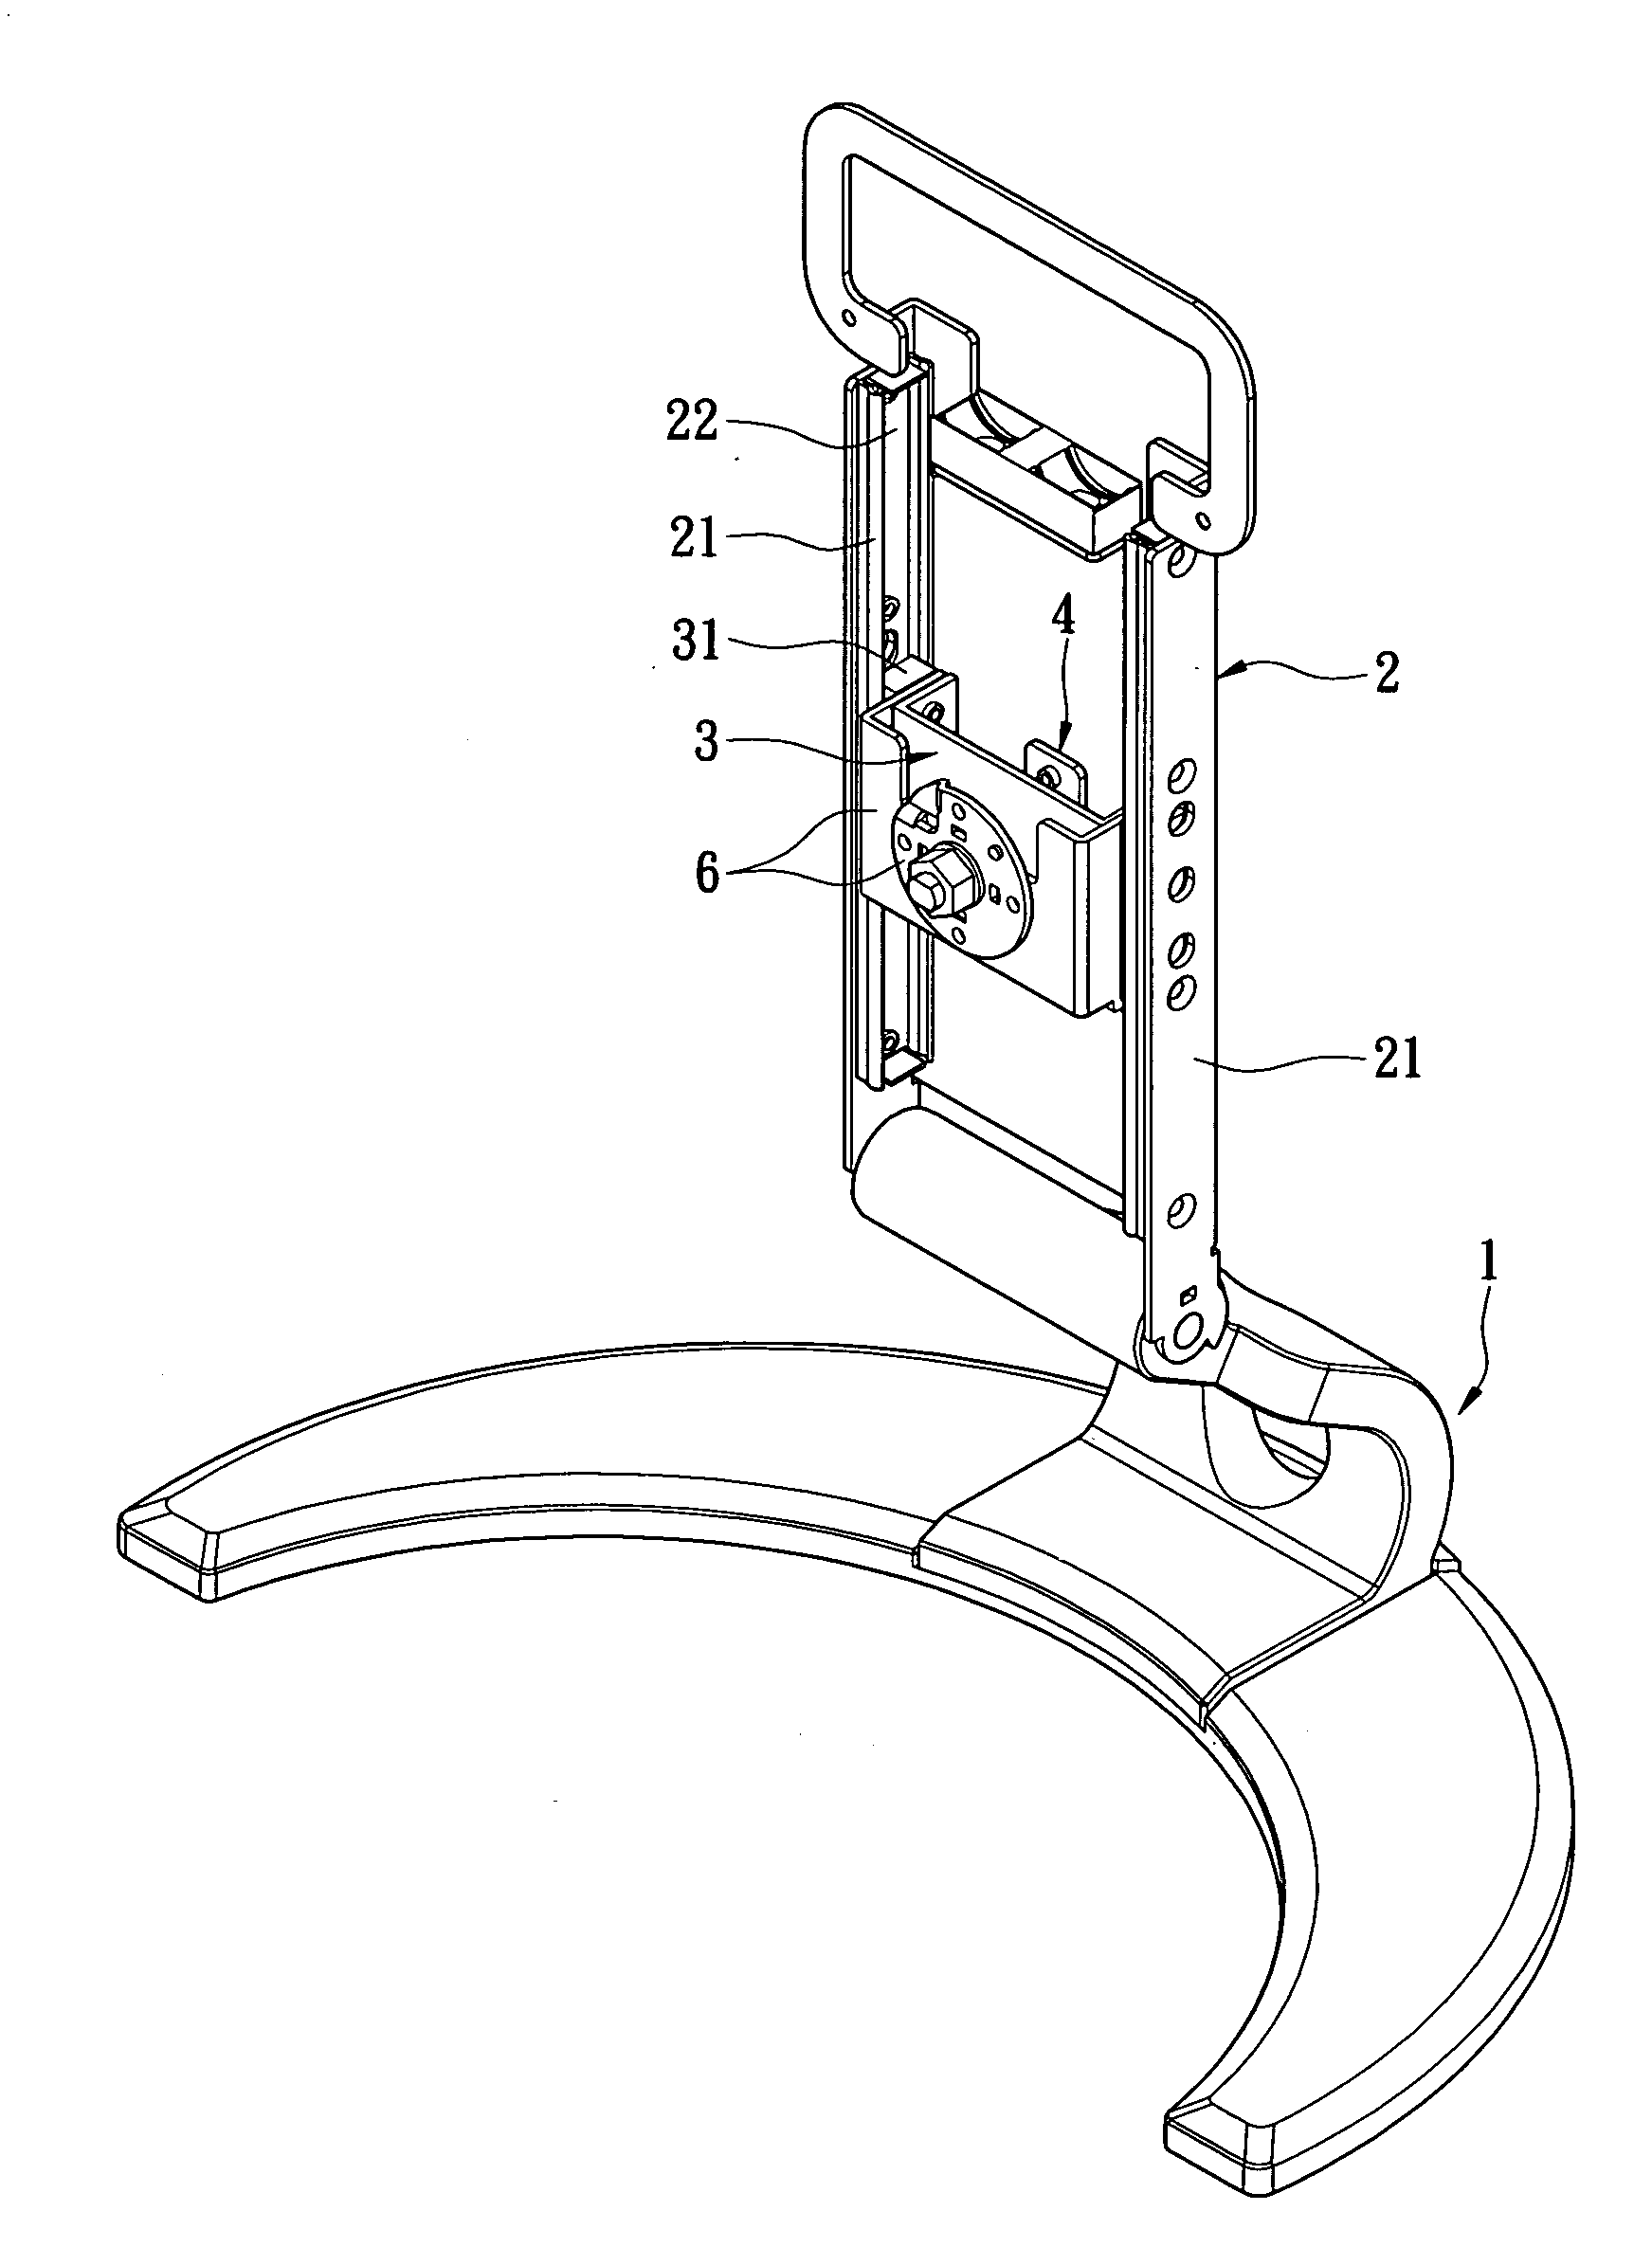 Foldable supporting stand with positioning means